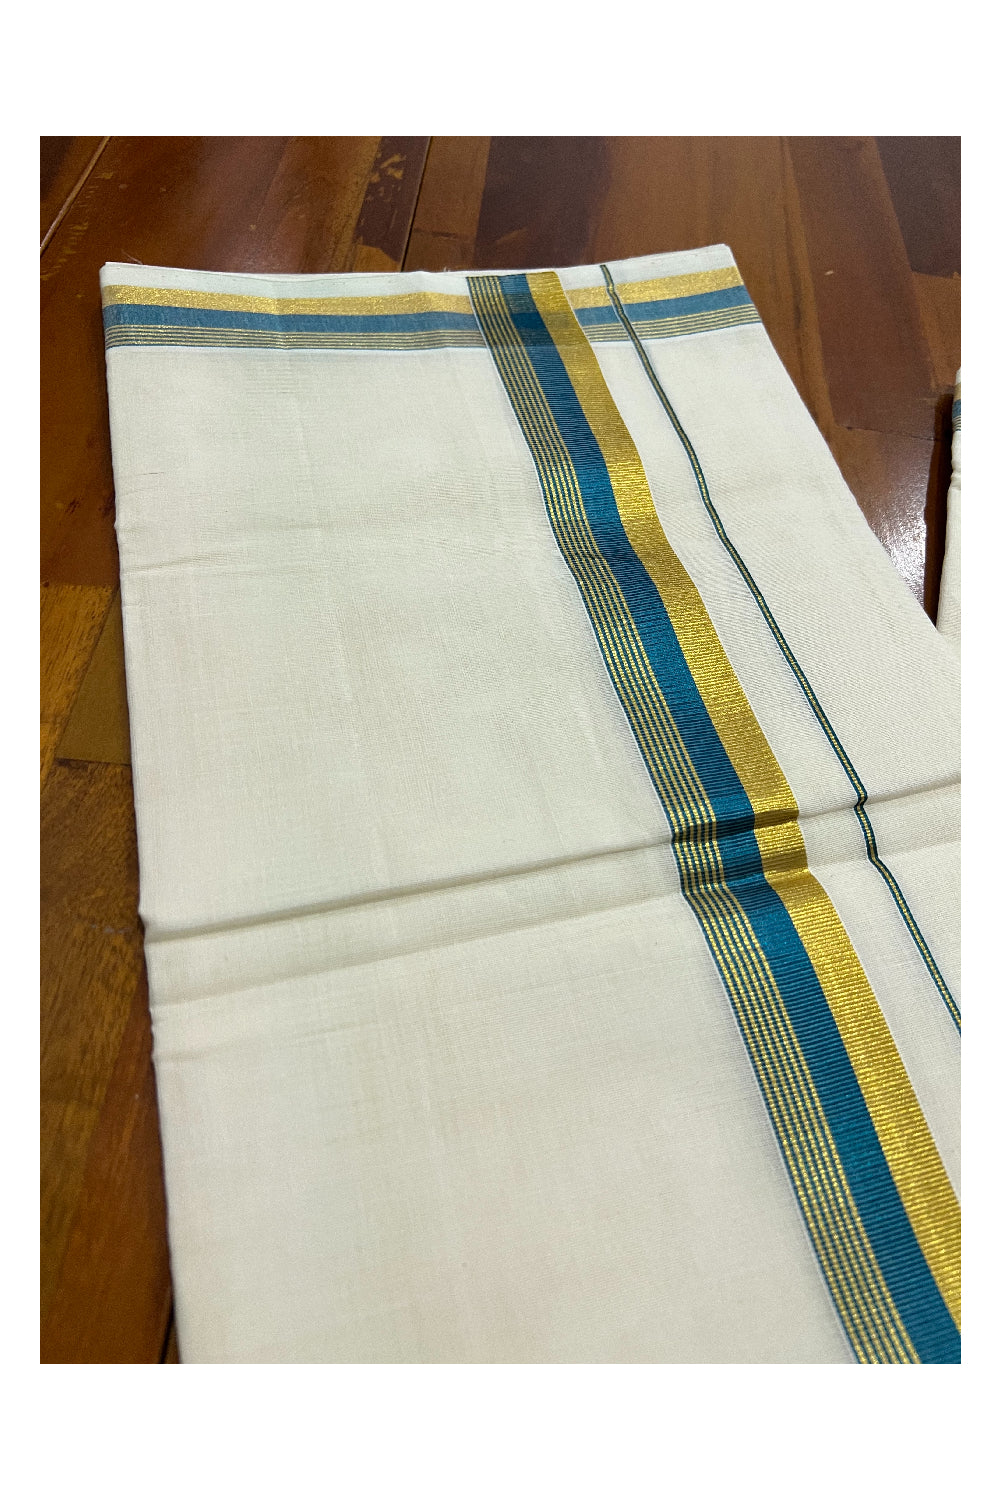 Southloom Kuthampully Handloom Pure Cotton Mundu with Goden and Teal Blue Kasavu Border (South Indian Dhoti)